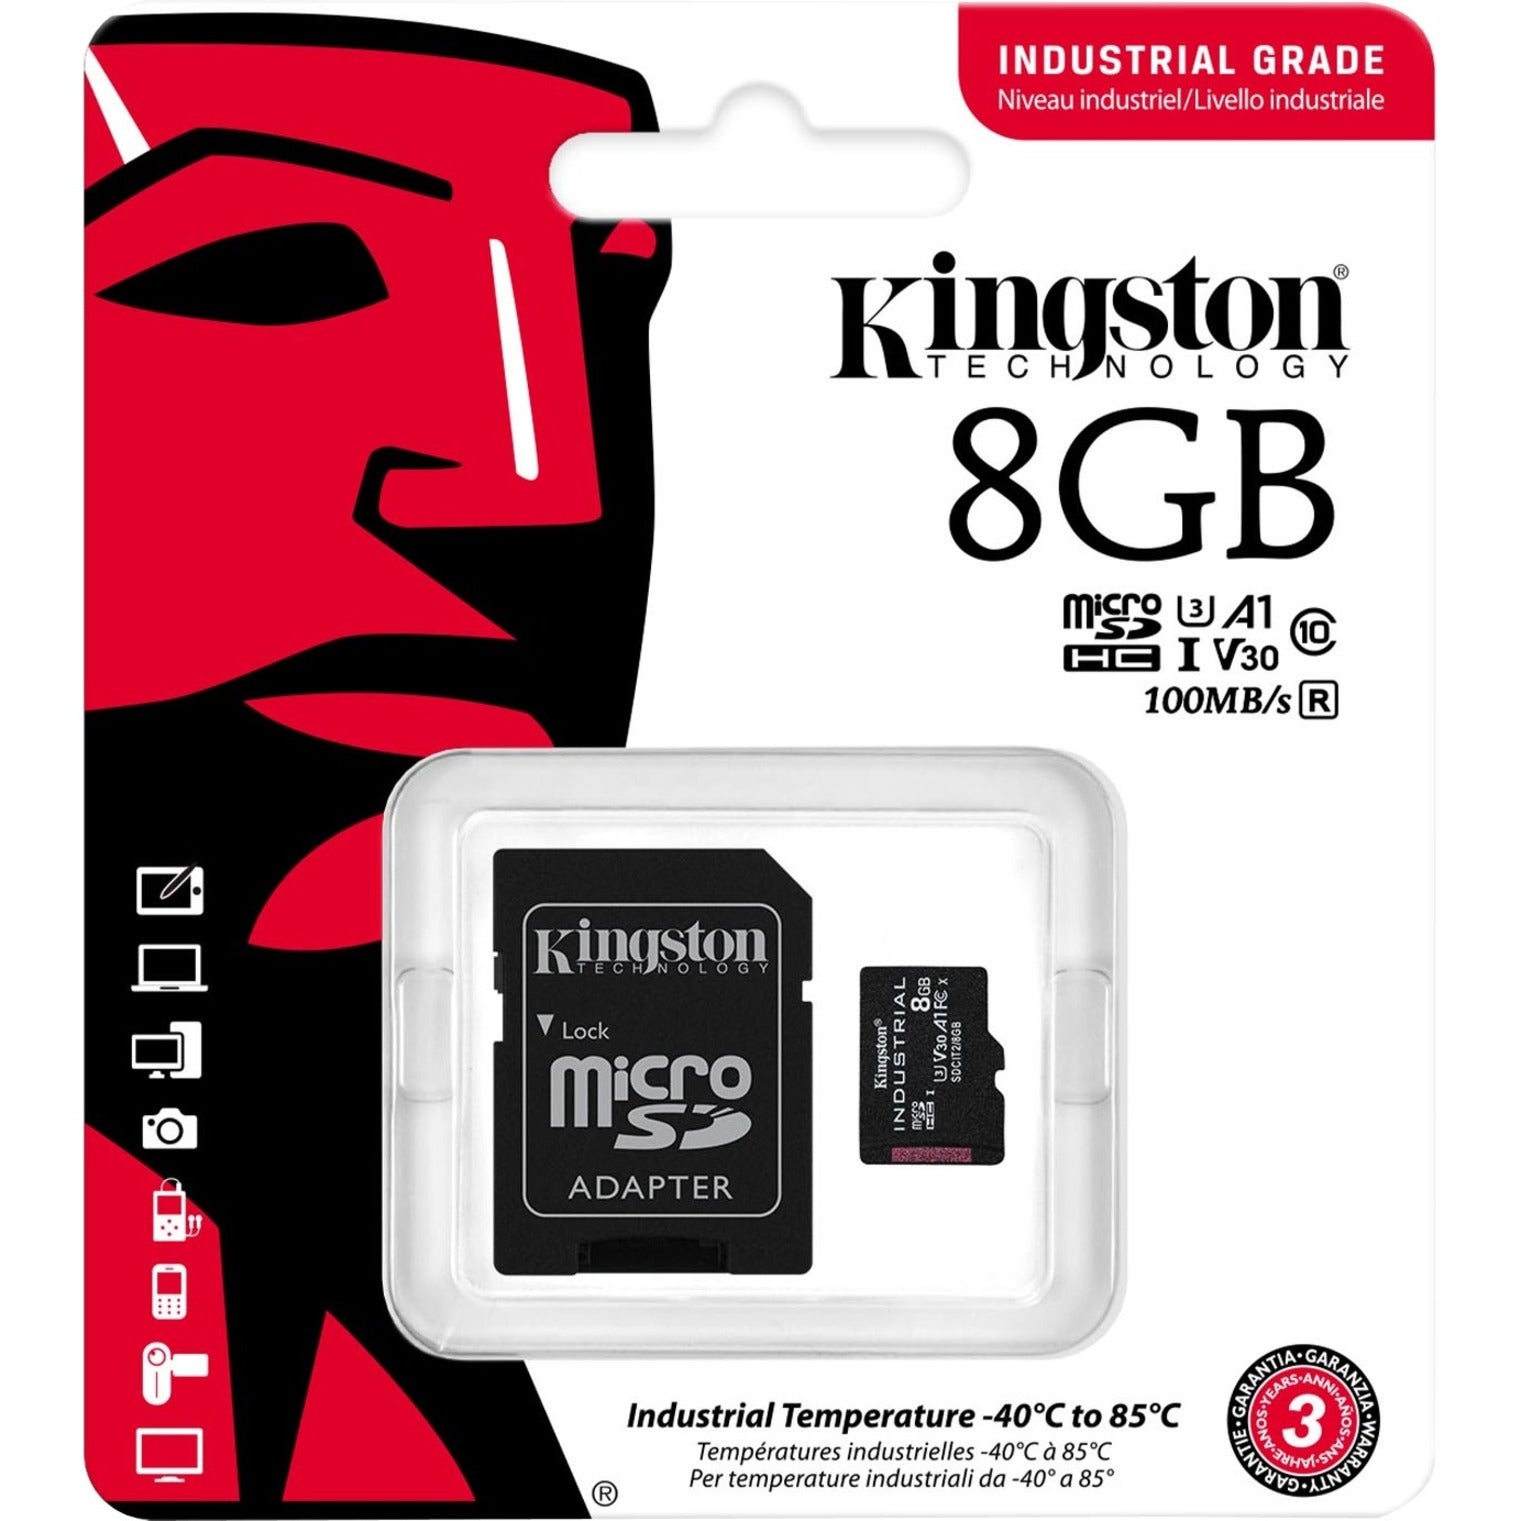 Kingston SDCIT2/8GB Industrial 8GB microSDHC Card, 100 MB/s Data Transfer Rate, V30 Video Speed Class